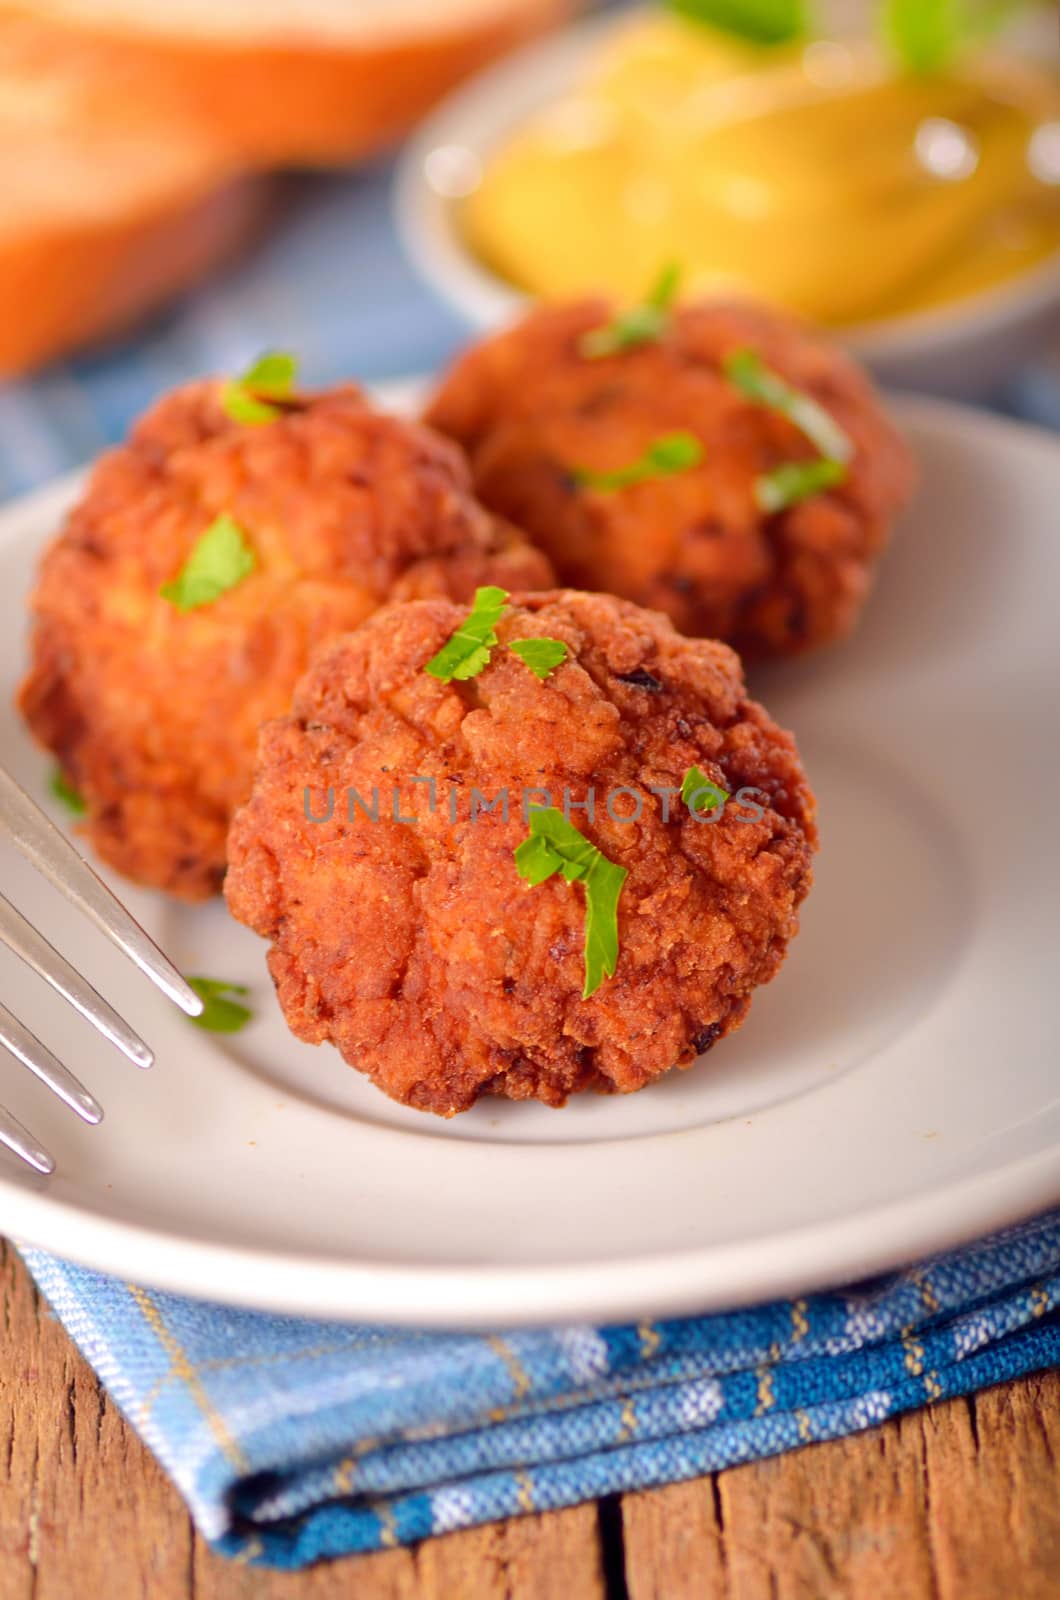 meat balls with mustard on white dish  by mady70